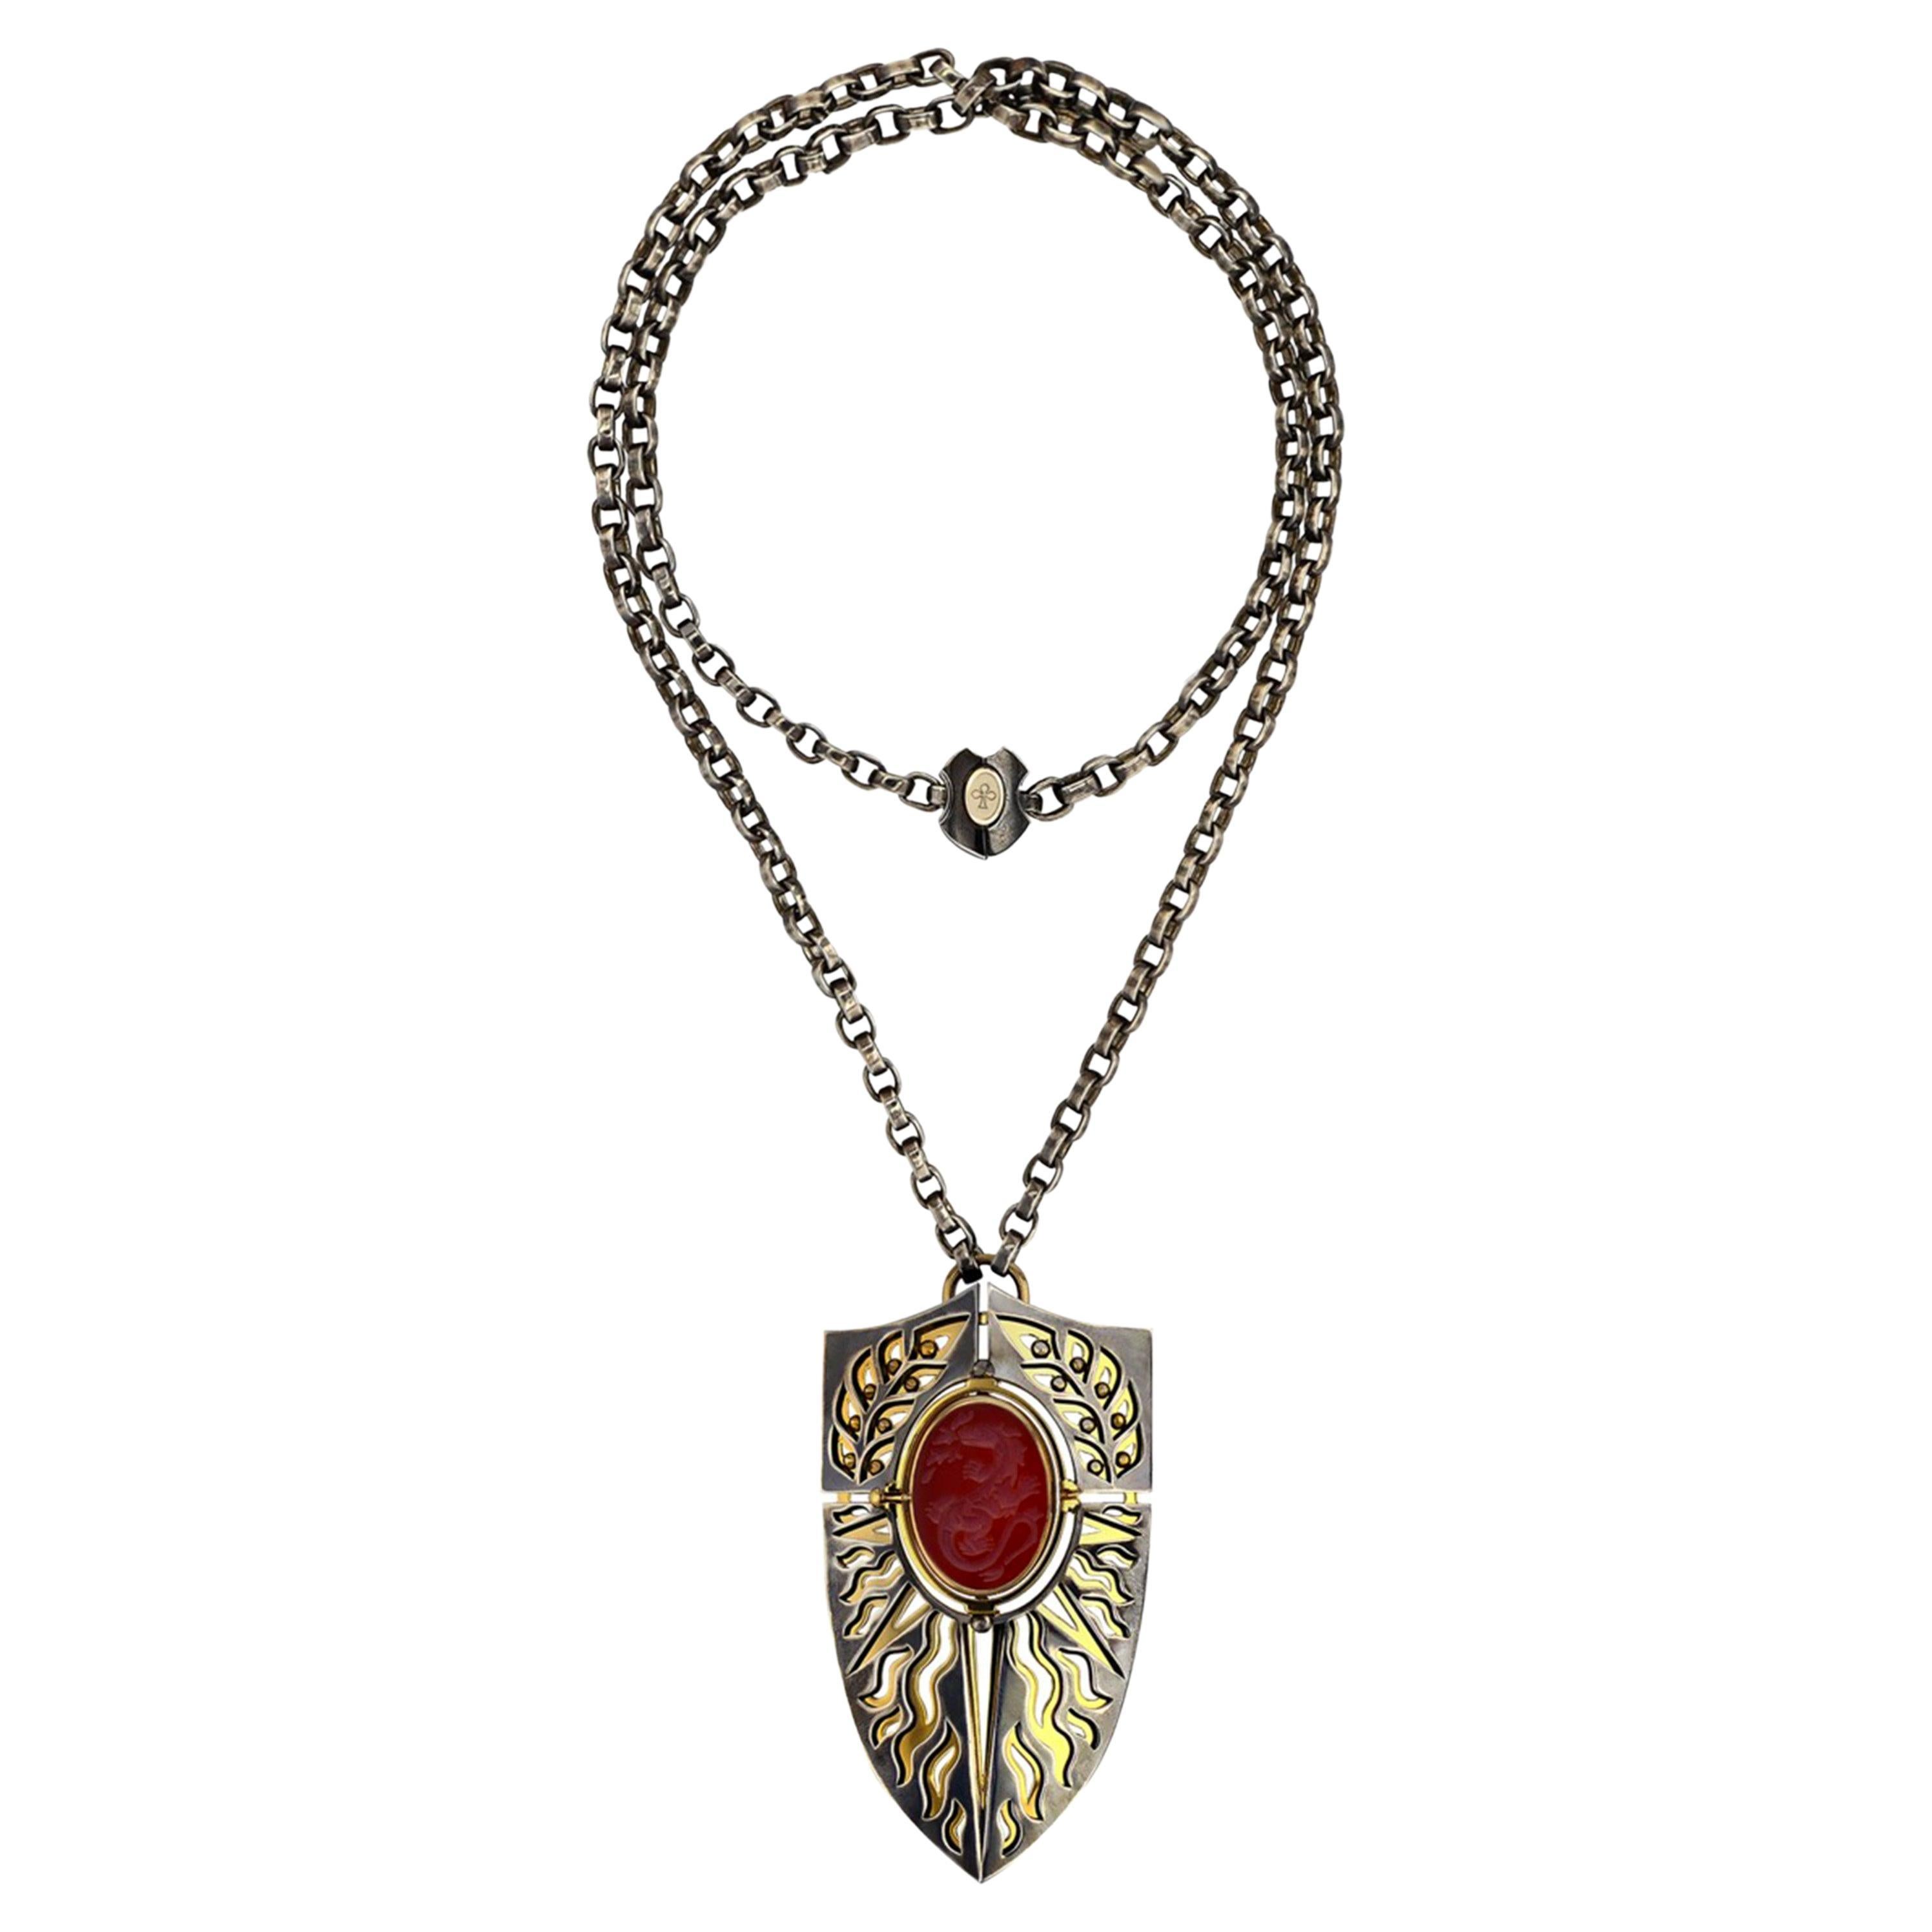 FEU Bouclier Pendant in 18k Yellow Gold & Distressed Silver by Elie Top